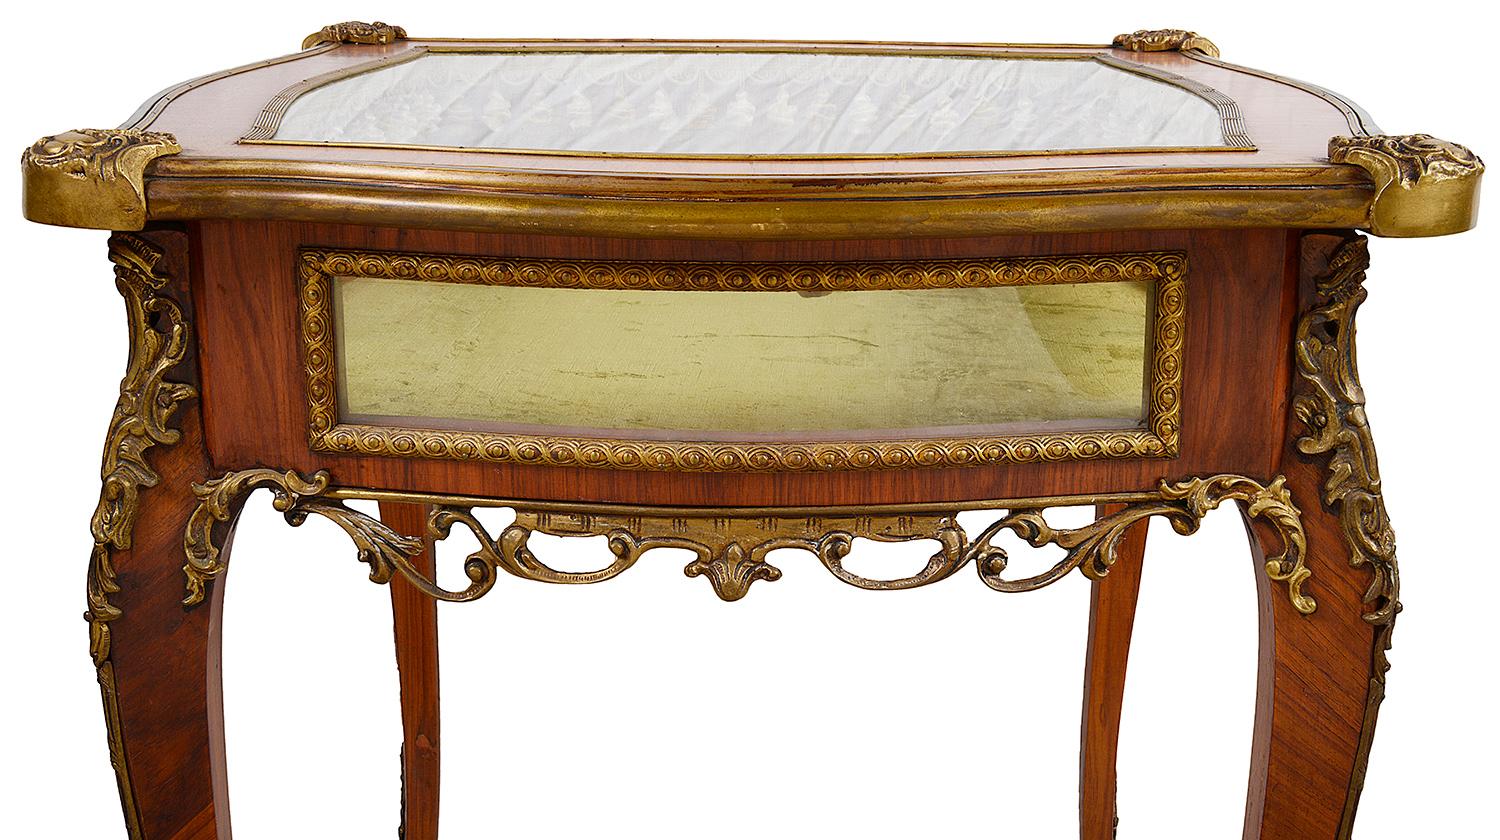 20th Century French Bijouterie / Display Table, circa 1920